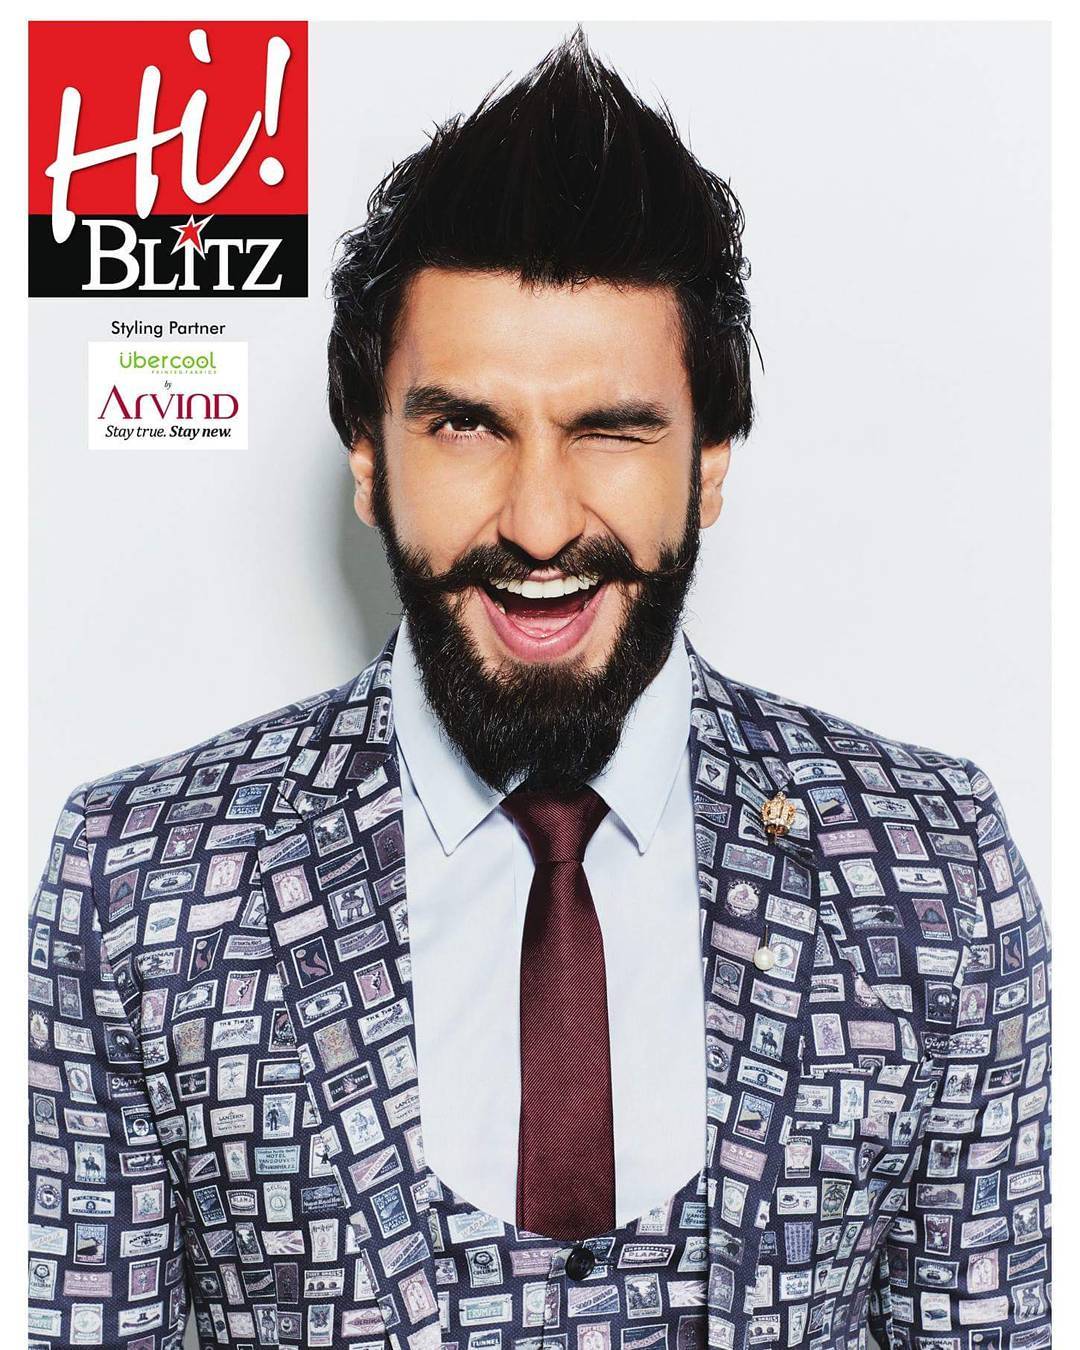 When all eyes are on you, just wink! Here’s how Ranveer spreads his eccentric charm donning his quirky look with Uber Cool Fabric range from the house of TheArvindStore.

#StayTrueStayNew #DapperLook #BeUberCool #FashionForMen #TheArivndStore